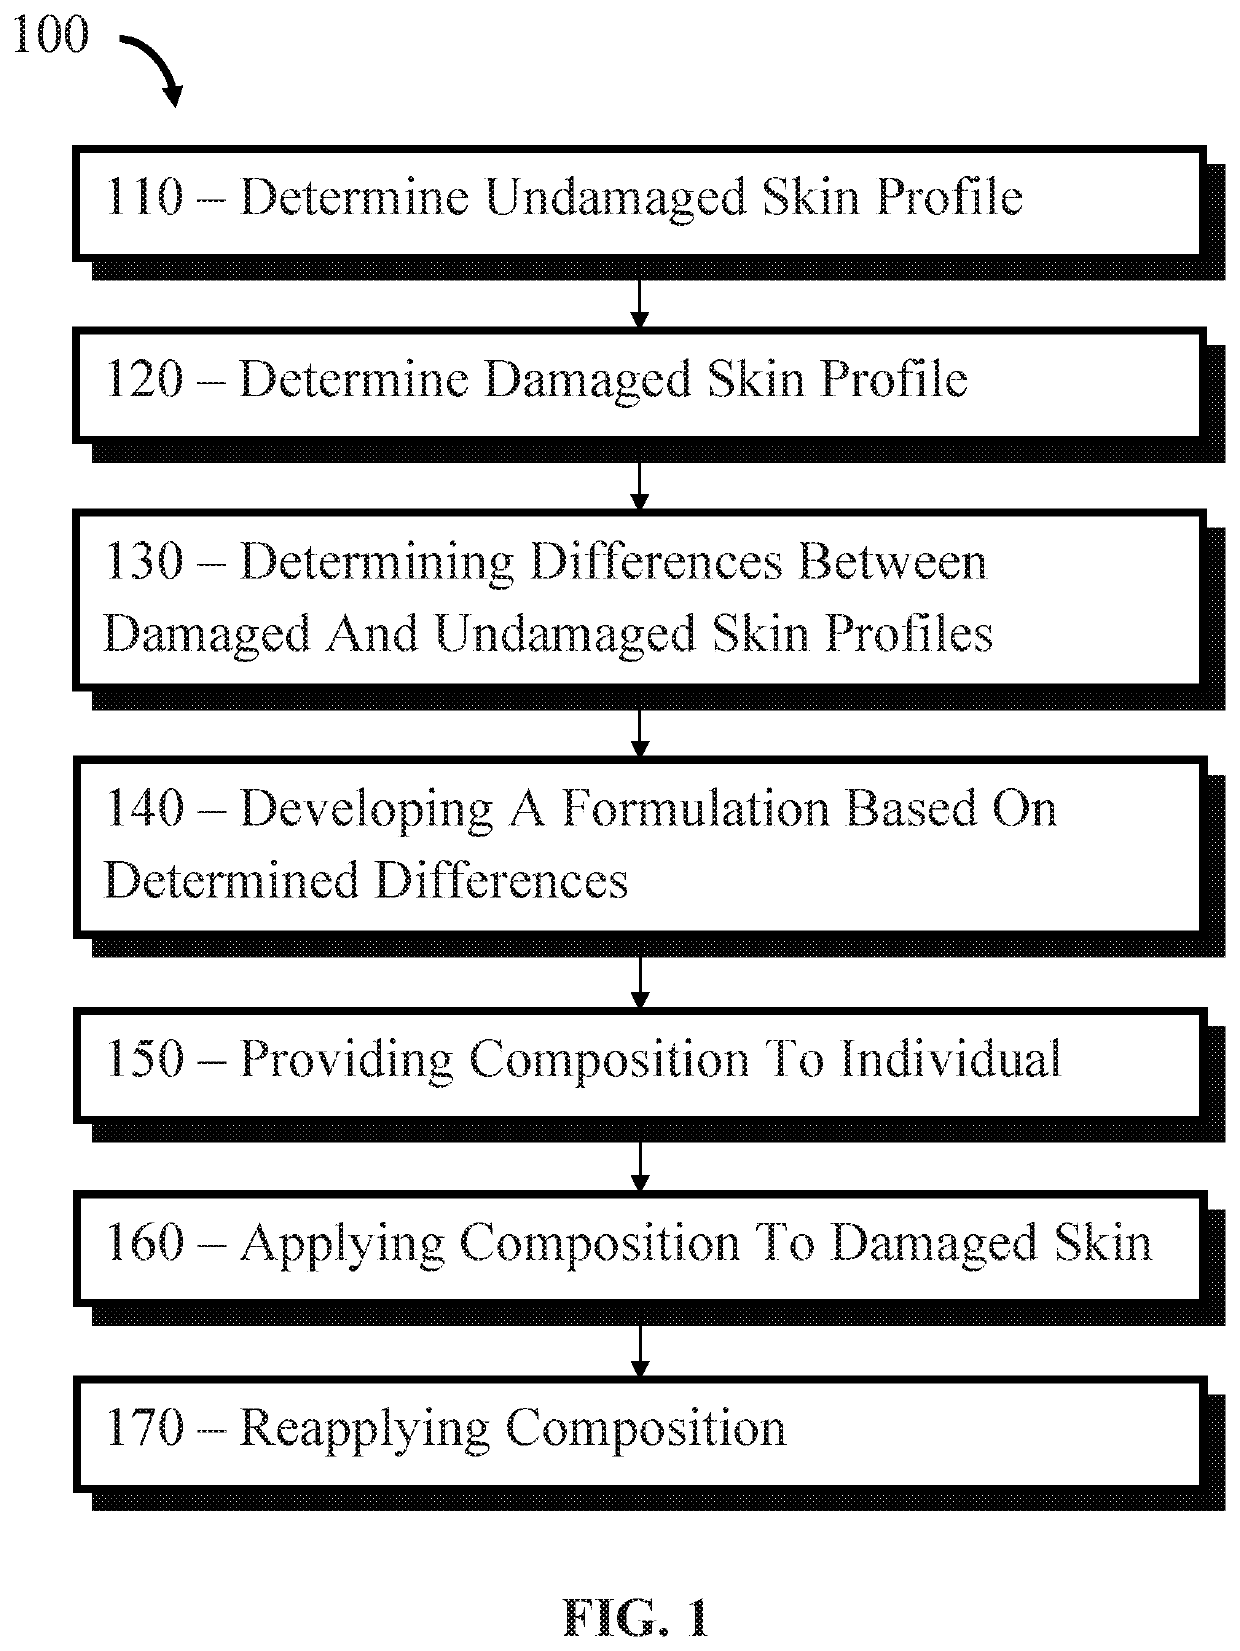 Skin barrier repair and maintenance composition